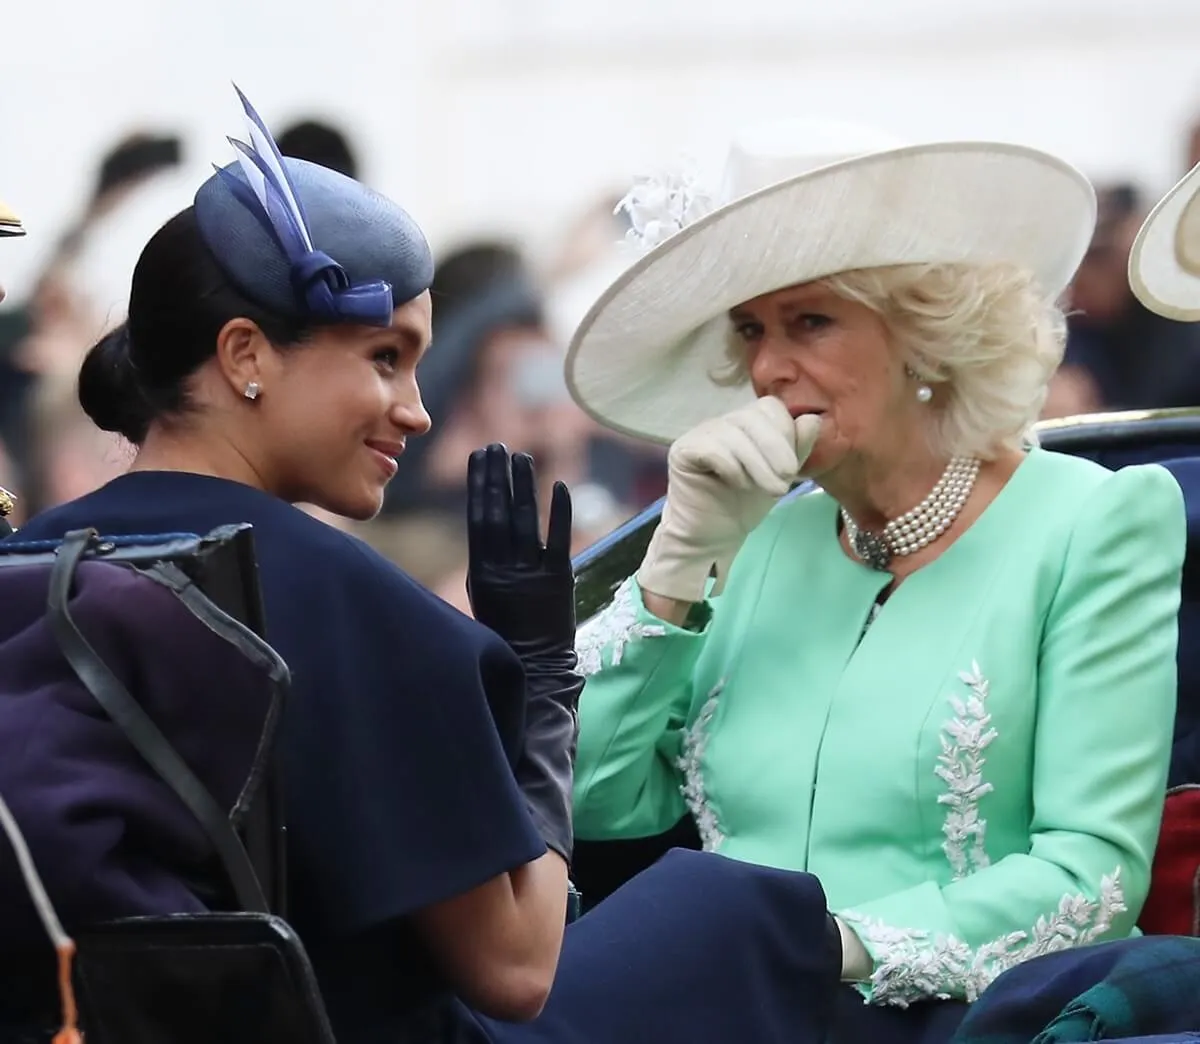 Meghan Markle and Camilla Parker Bowles (now-Queen Camilla) riding in a carriage during Trooping The Colour